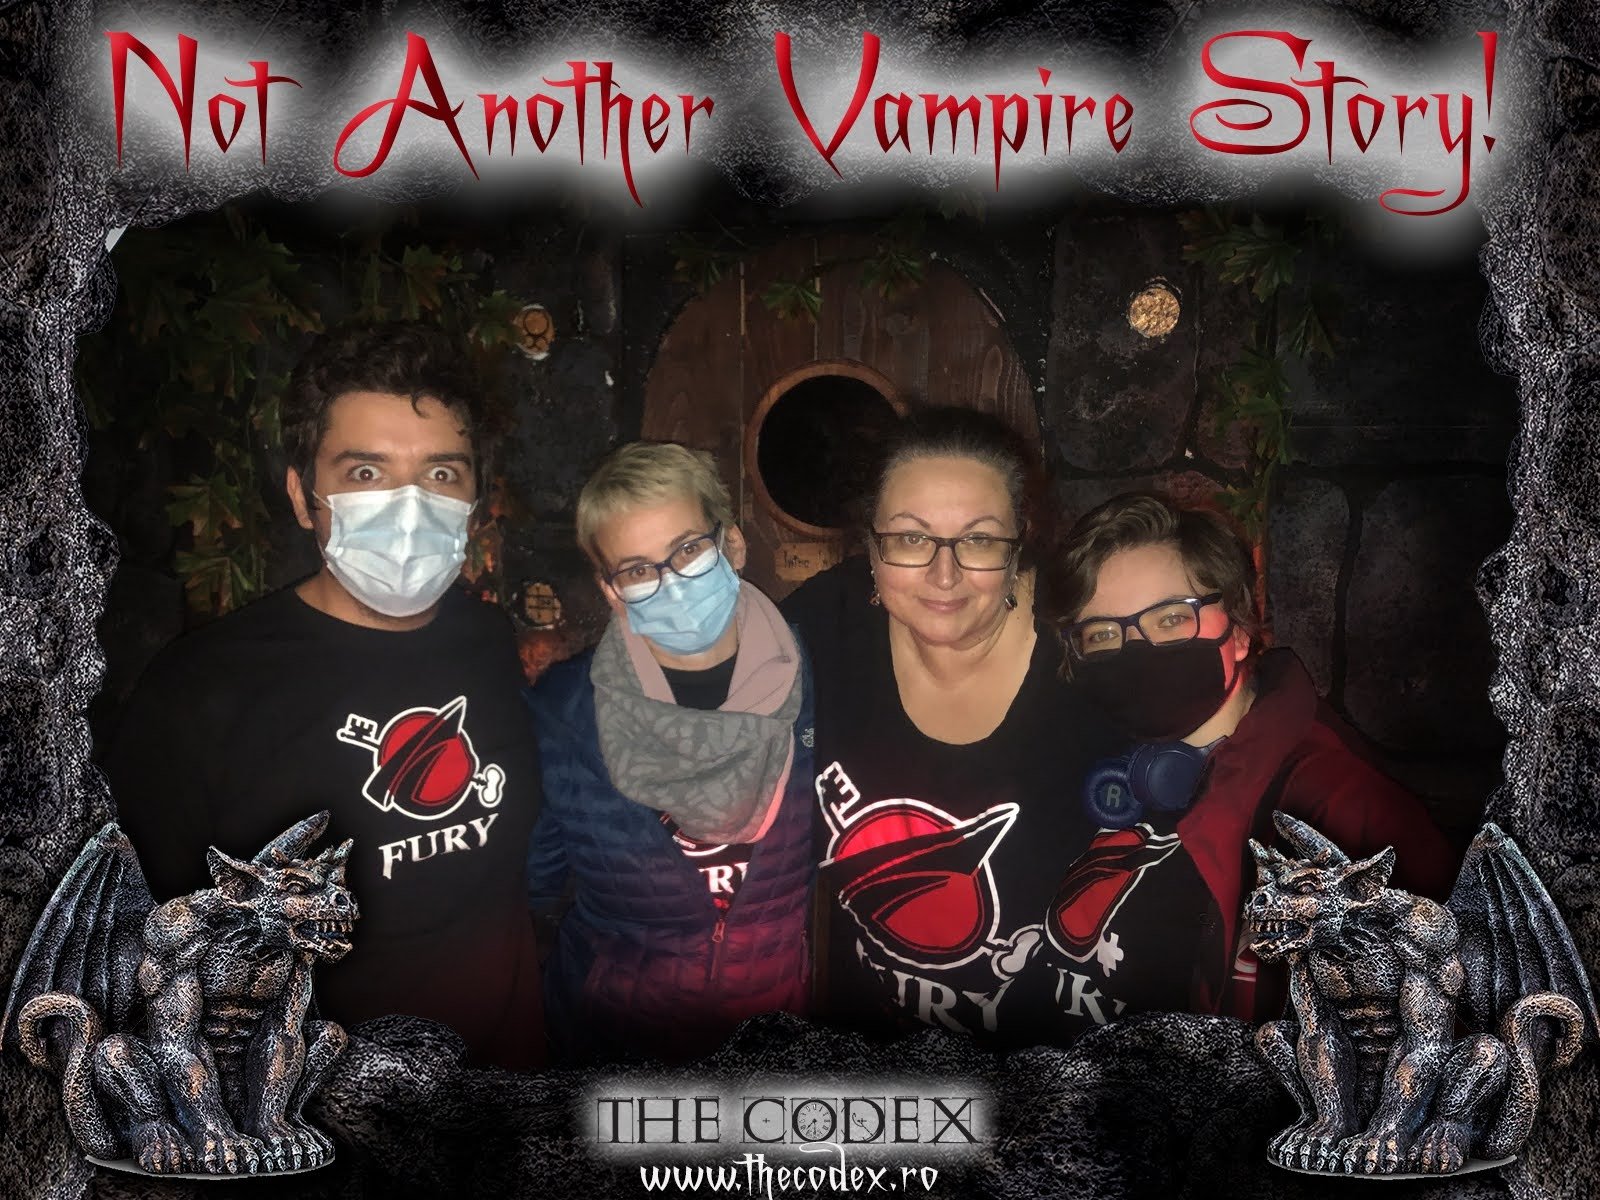 The Codex – Not another vampire story